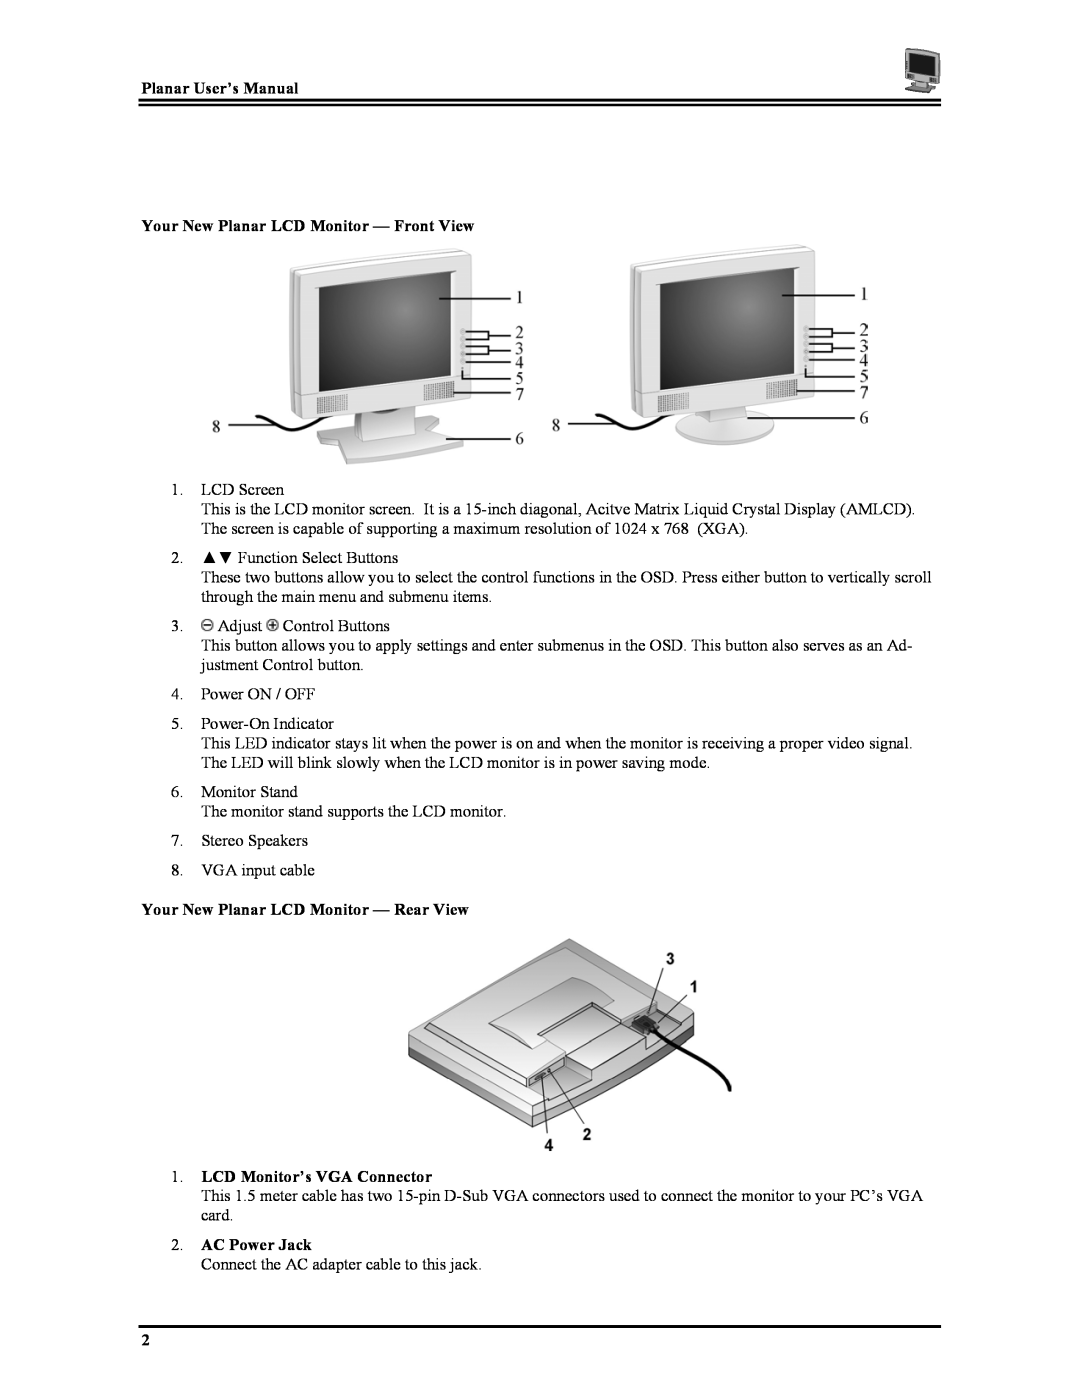 Planar PT1503Z Planar User’s Manual Your New Planar LCD Monitor - Front View, Your New Planar LCD Monitor - Rear View 